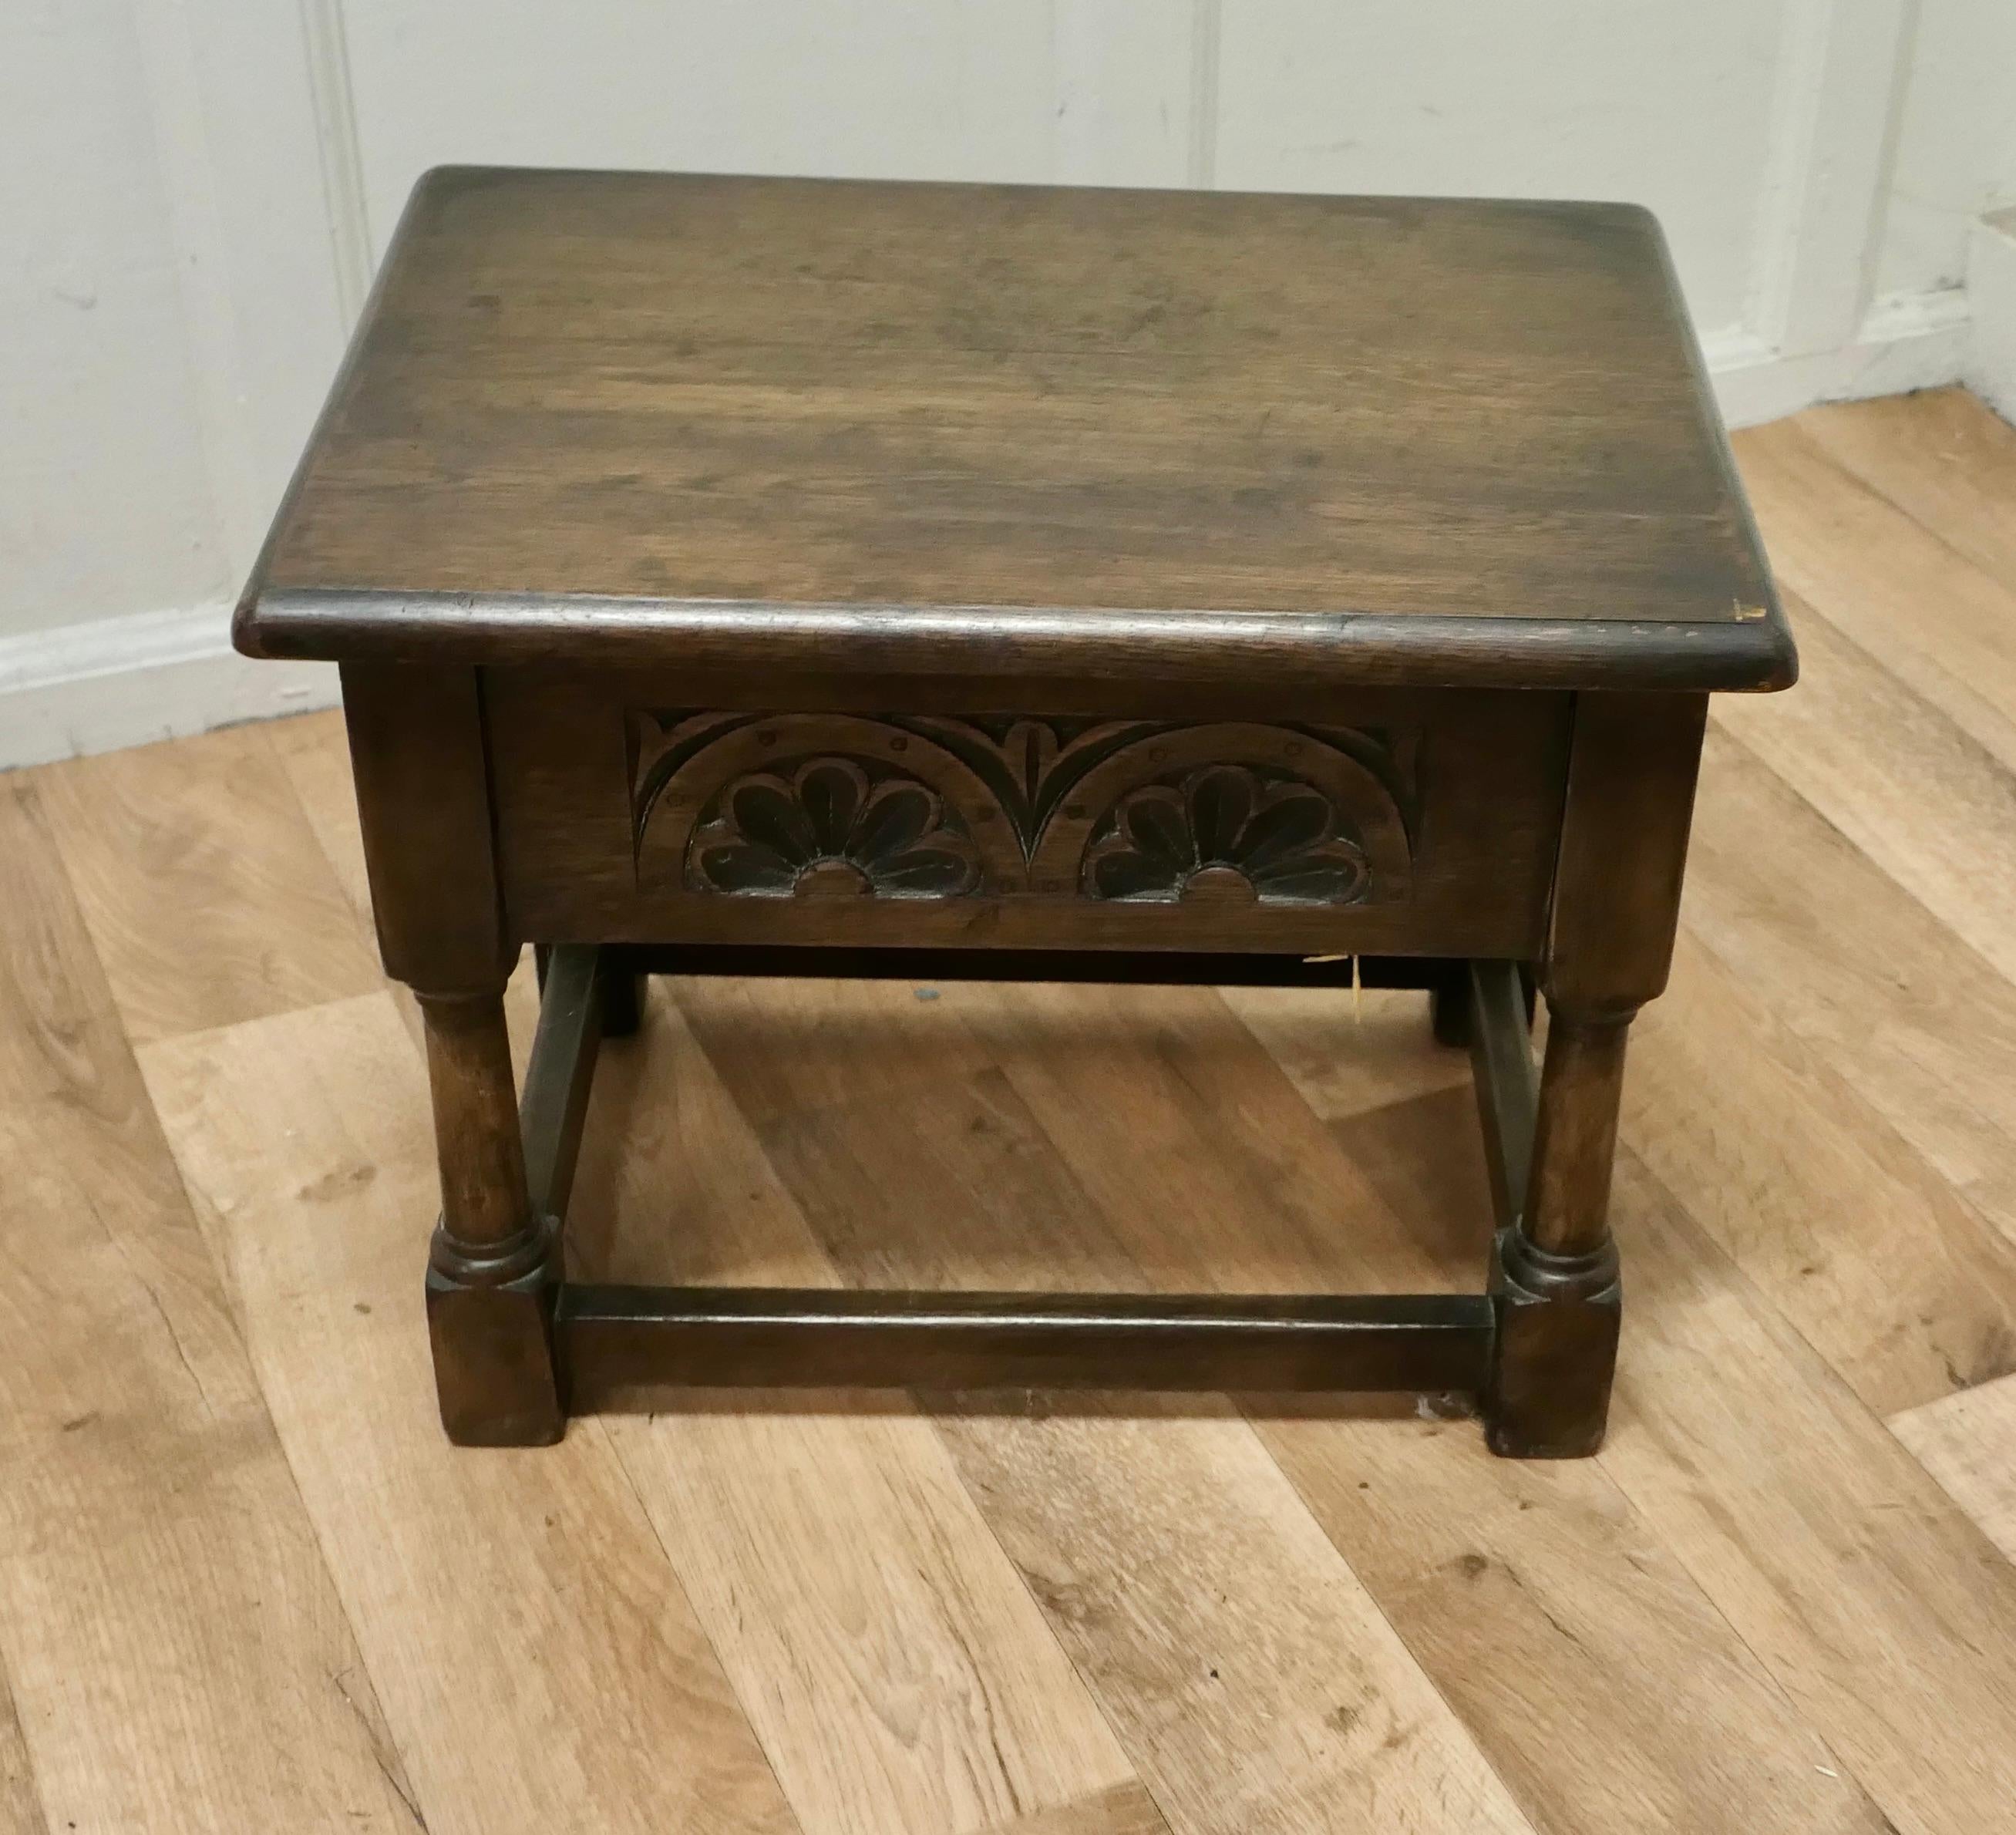 An Oak Joint coffin stool, occasional table, sewing box

This a good Oak Joint or Joined Stool which has the added advantage of an opening top with a storage compartment inside
This is a good solid stool, with a good colour, just open the top for